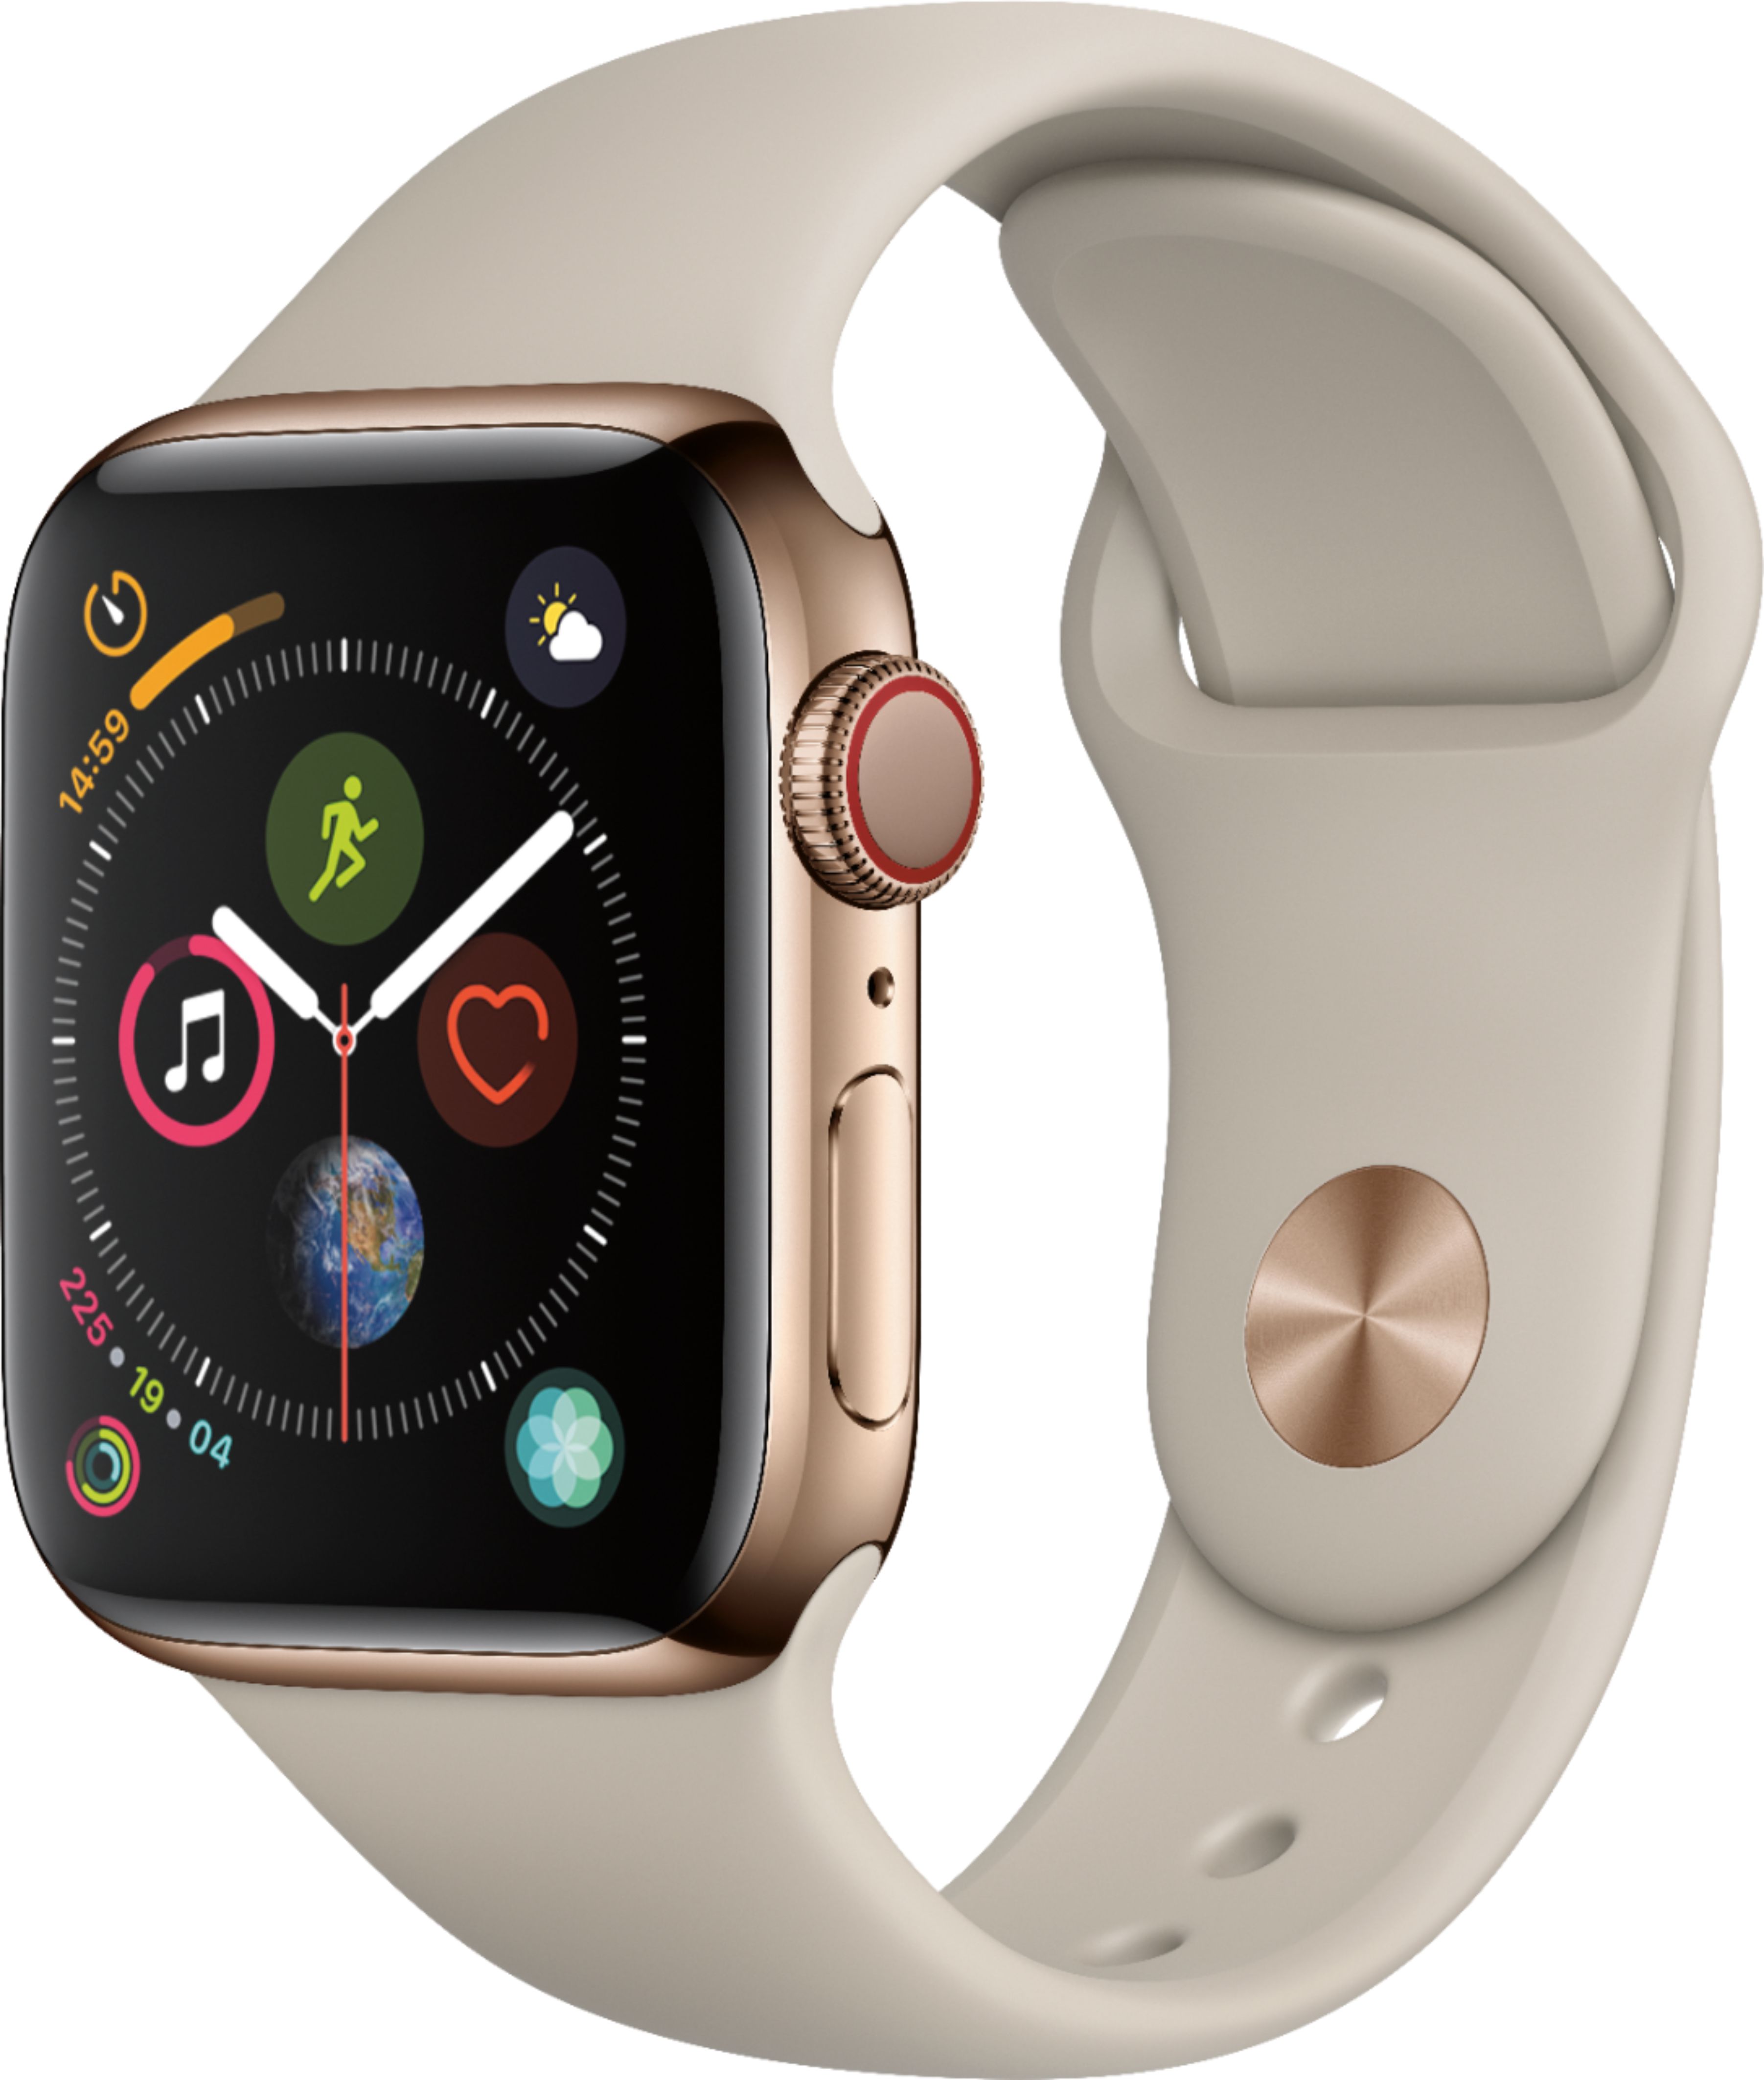 Geek Squad Certified Refurbished Apple Watch Series 4 (GPS + Cellular) 40mm Stainless Steel Case with Stone Sport Band - Gold Stainless Steel